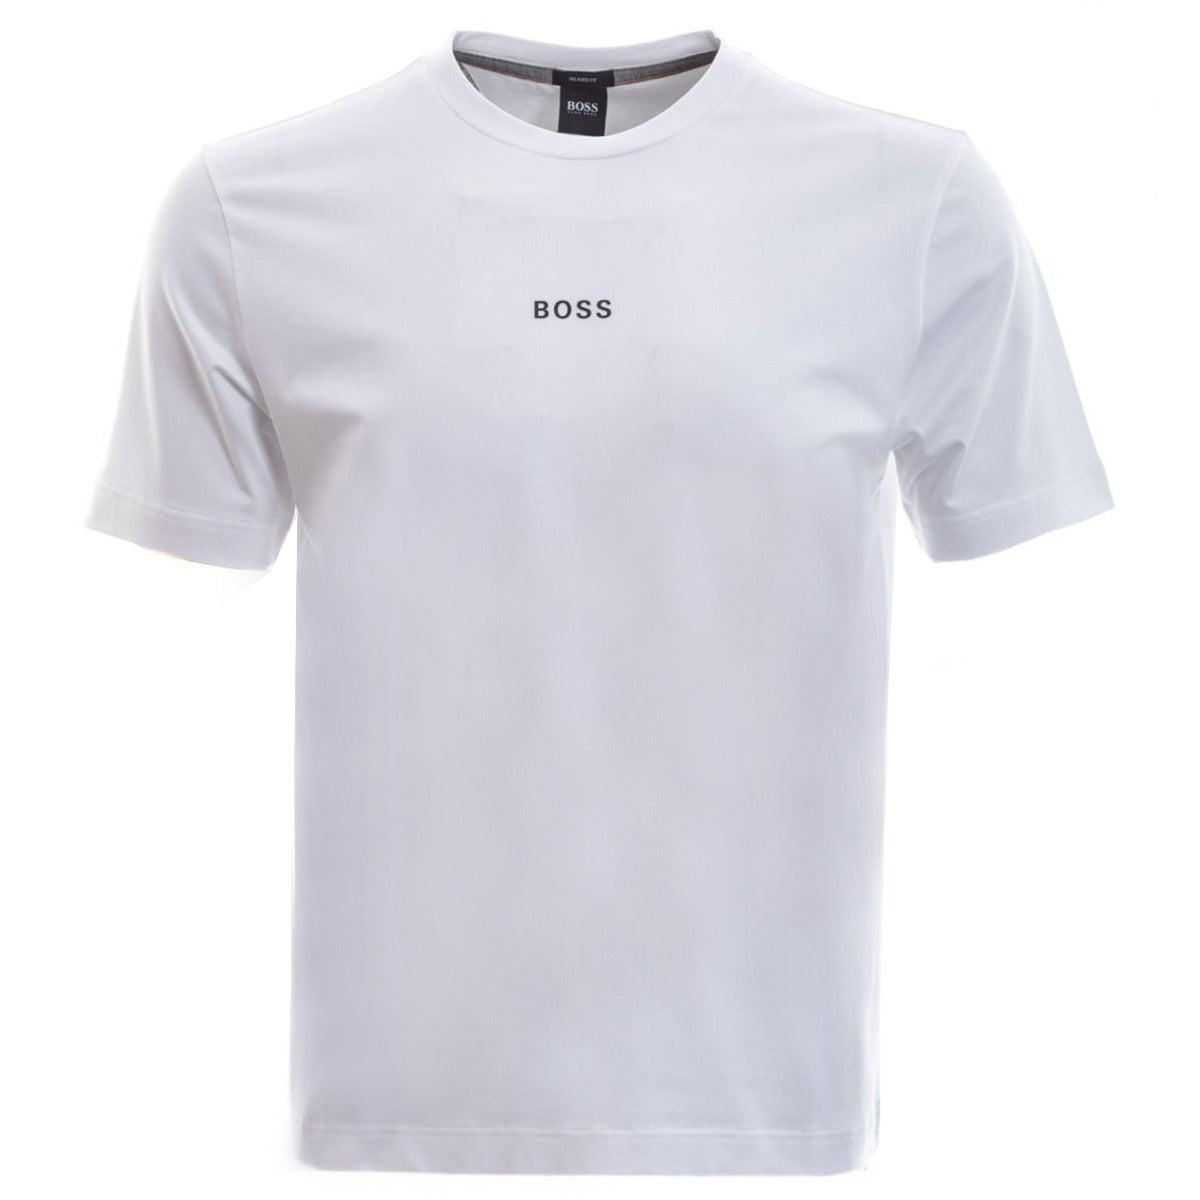 BOSS TChup 1 T Shirt in White Main